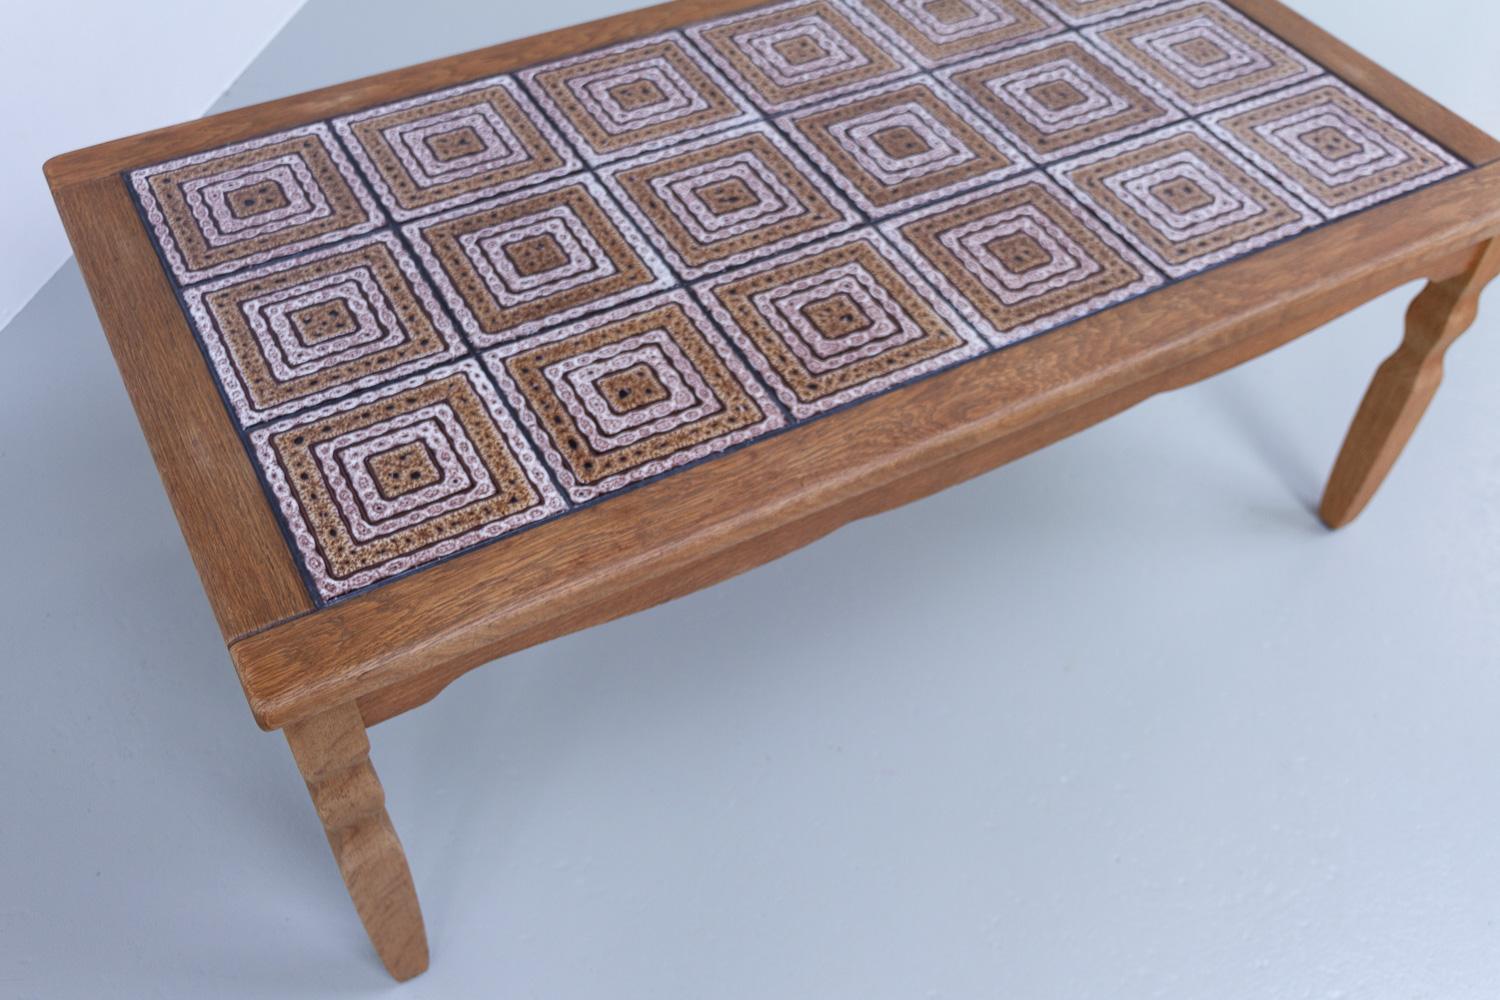 Ceramic Vintage Danish Brutalist Coffee Table in Oak with Tiles, 1960s. For Sale